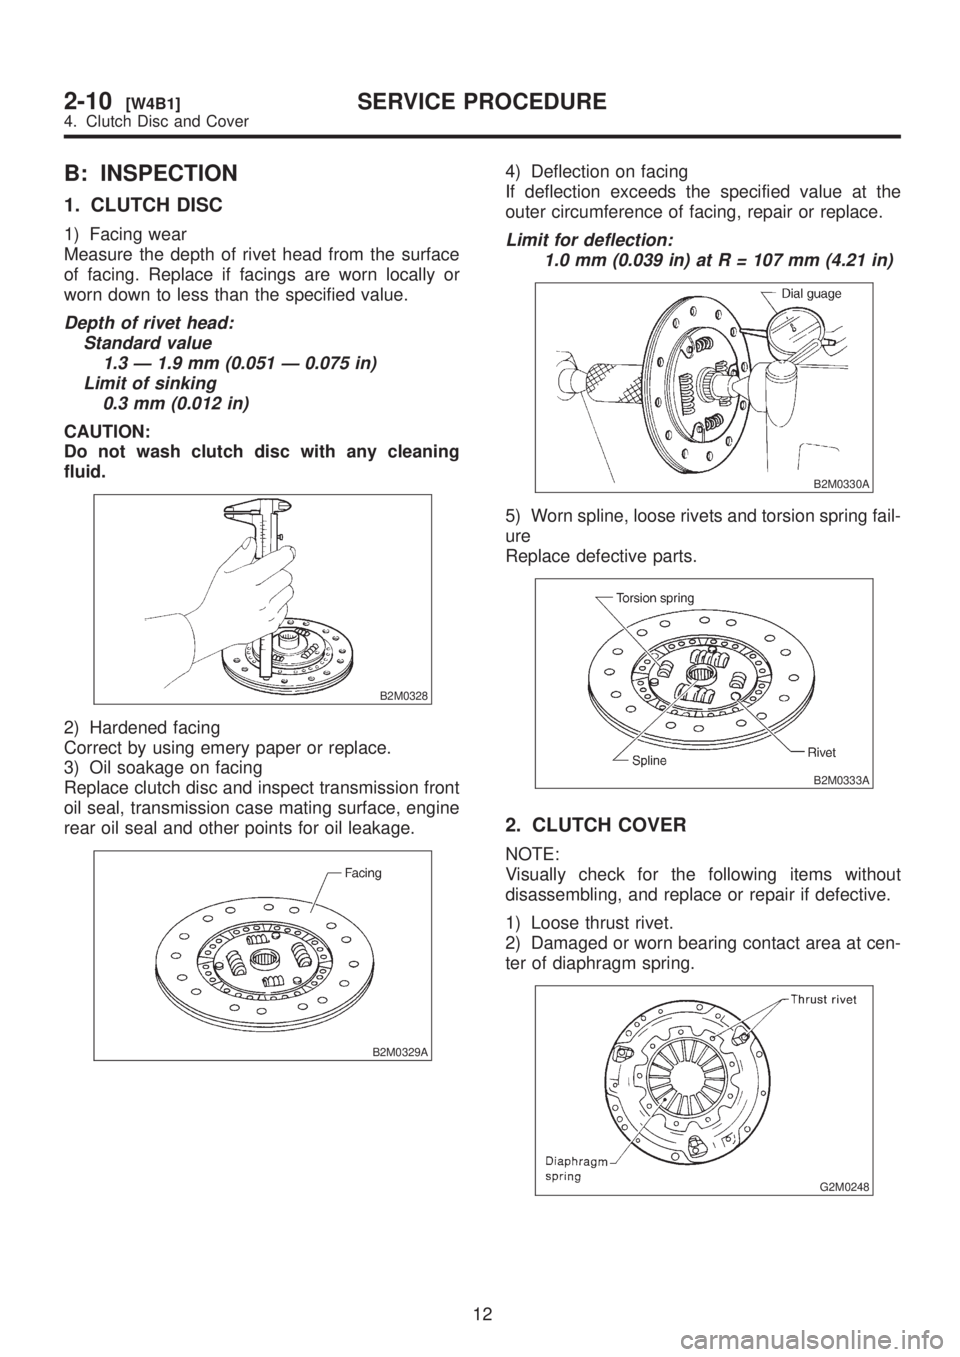 SUBARU LEGACY 1999  Service Repair Manual B: INSPECTION
1. CLUTCH DISC
1) Facing wear
Measure the depth of rivet head from the surface
of facing. Replace if facings are worn locally or
worn down to less than the specified value.
Depth of rive